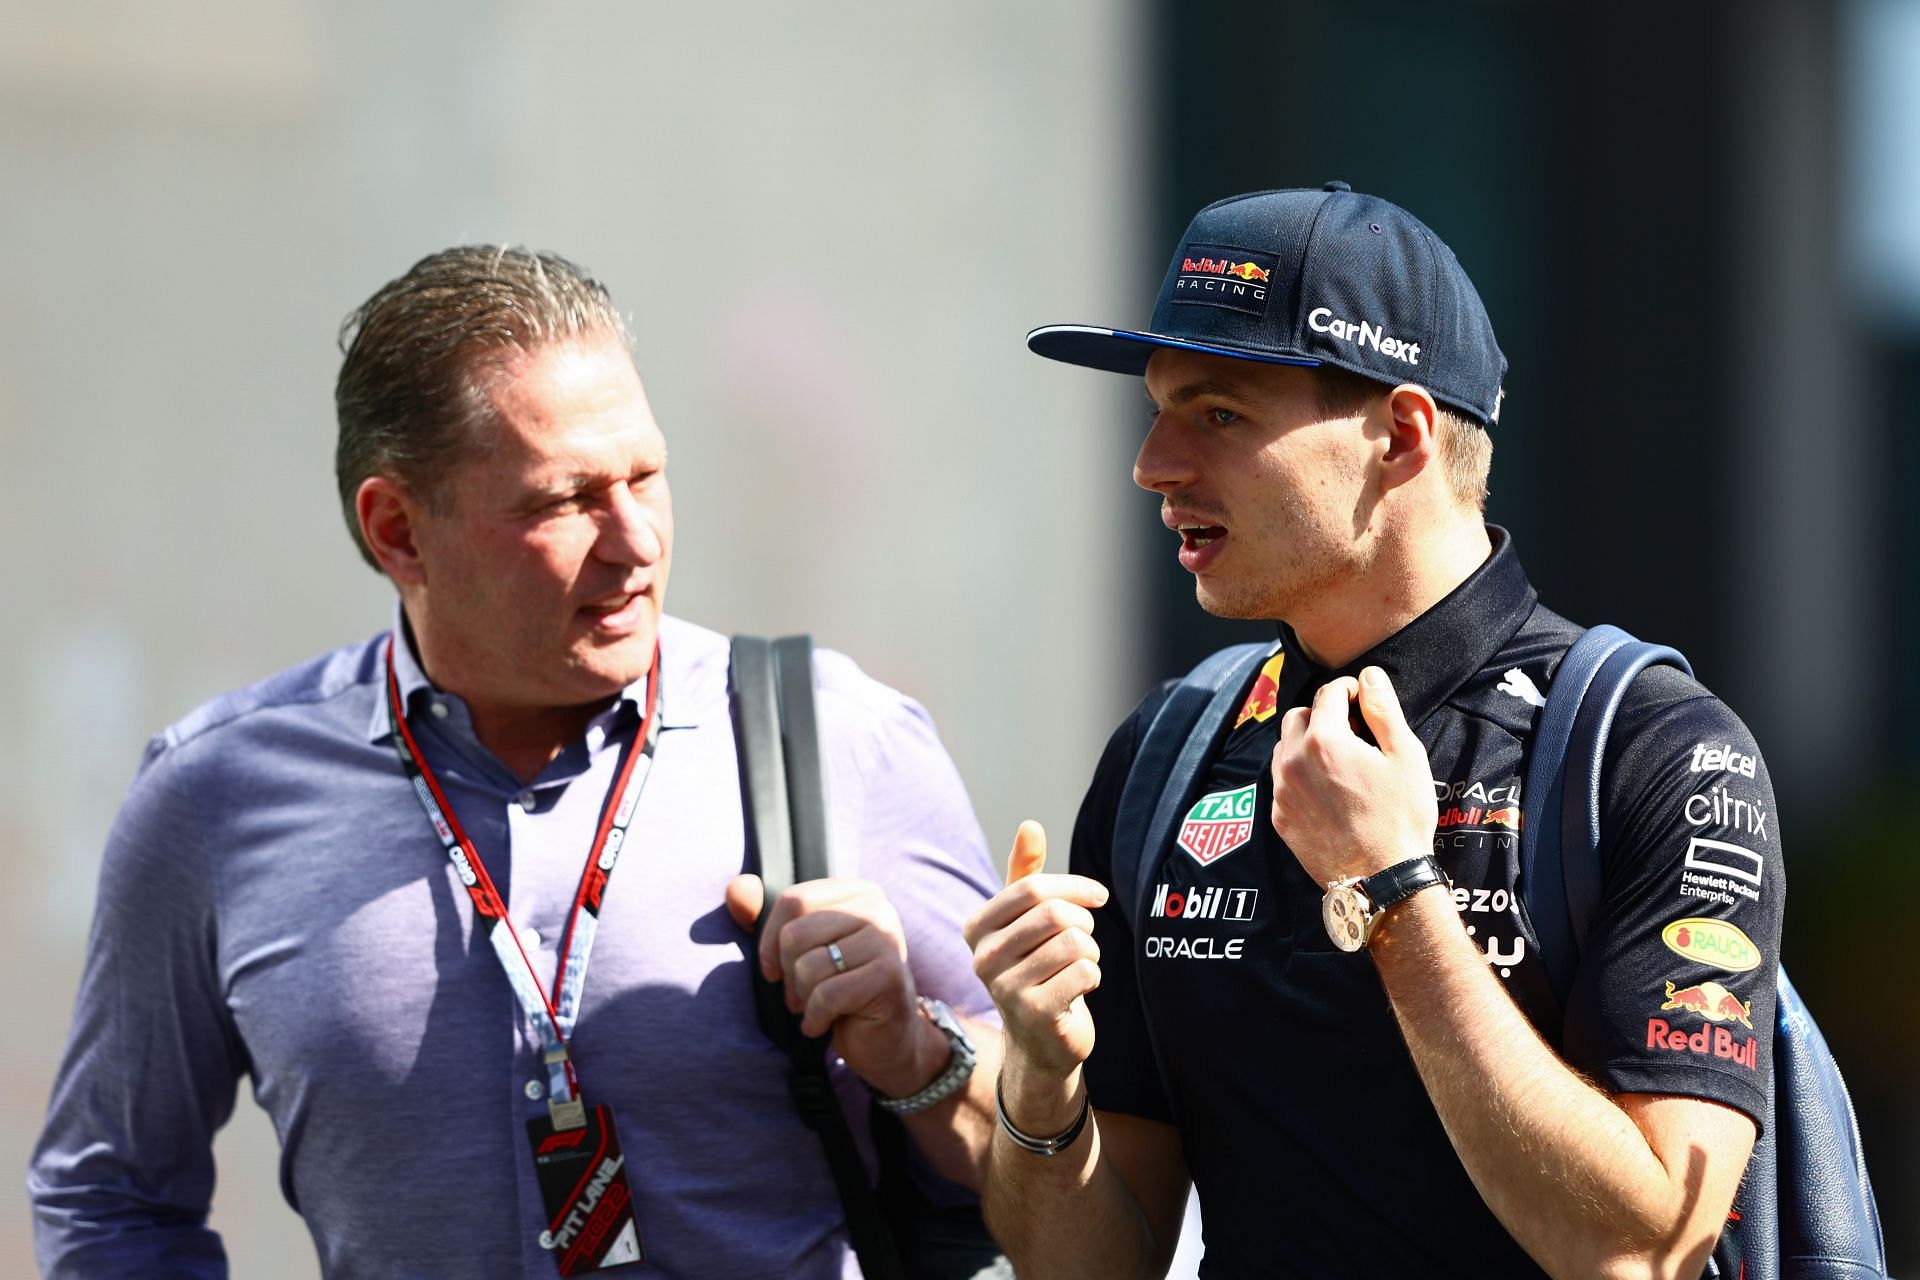 Jos (left) and Max Verstappen (right) are one of the iconic father-son pairings in F1 right now